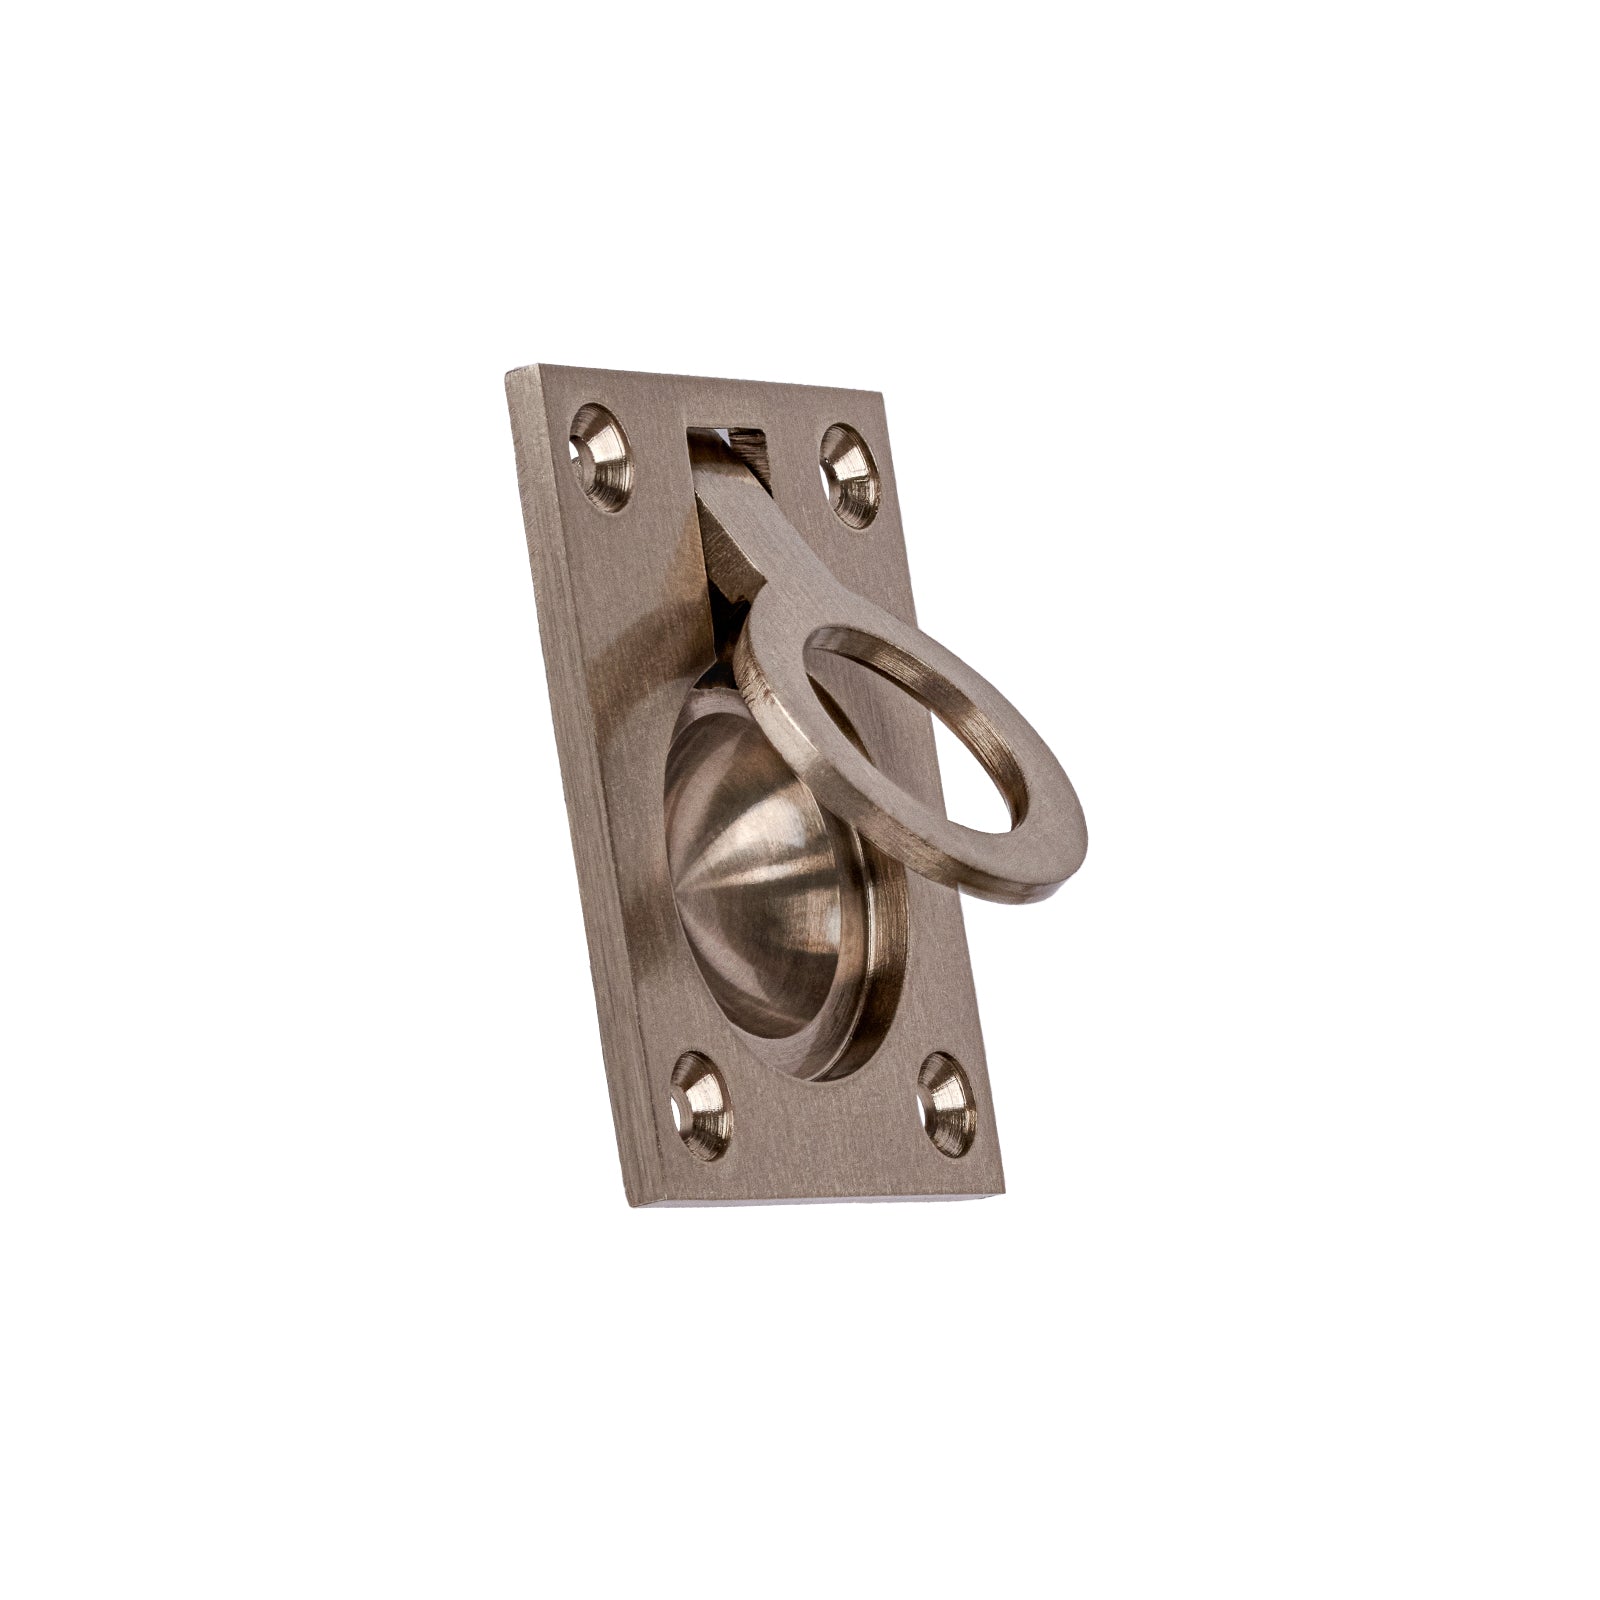 satin nickel flush ring cabinet pull, kitchen ring pull handle SHOW